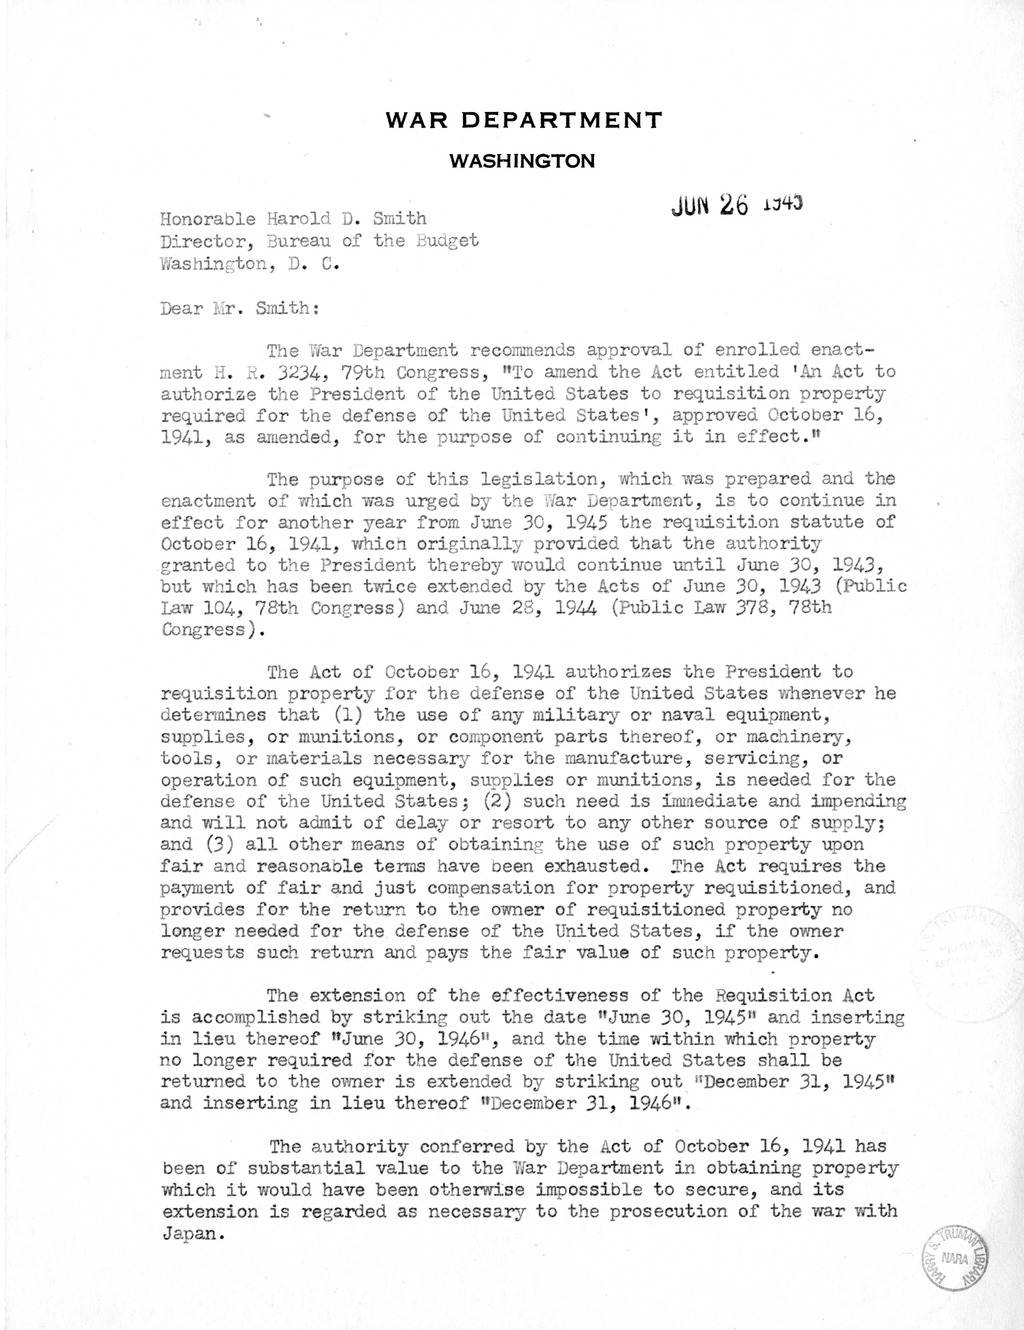 Memorandum from Harold D. Smith to M. C. Latta, H.R. 3234, To Amend An Act to Authorize the President of the United States to Requisition Property Required for the Defense of the United States', Approved October 16, 1941, as Amended, for the Purpose of Co